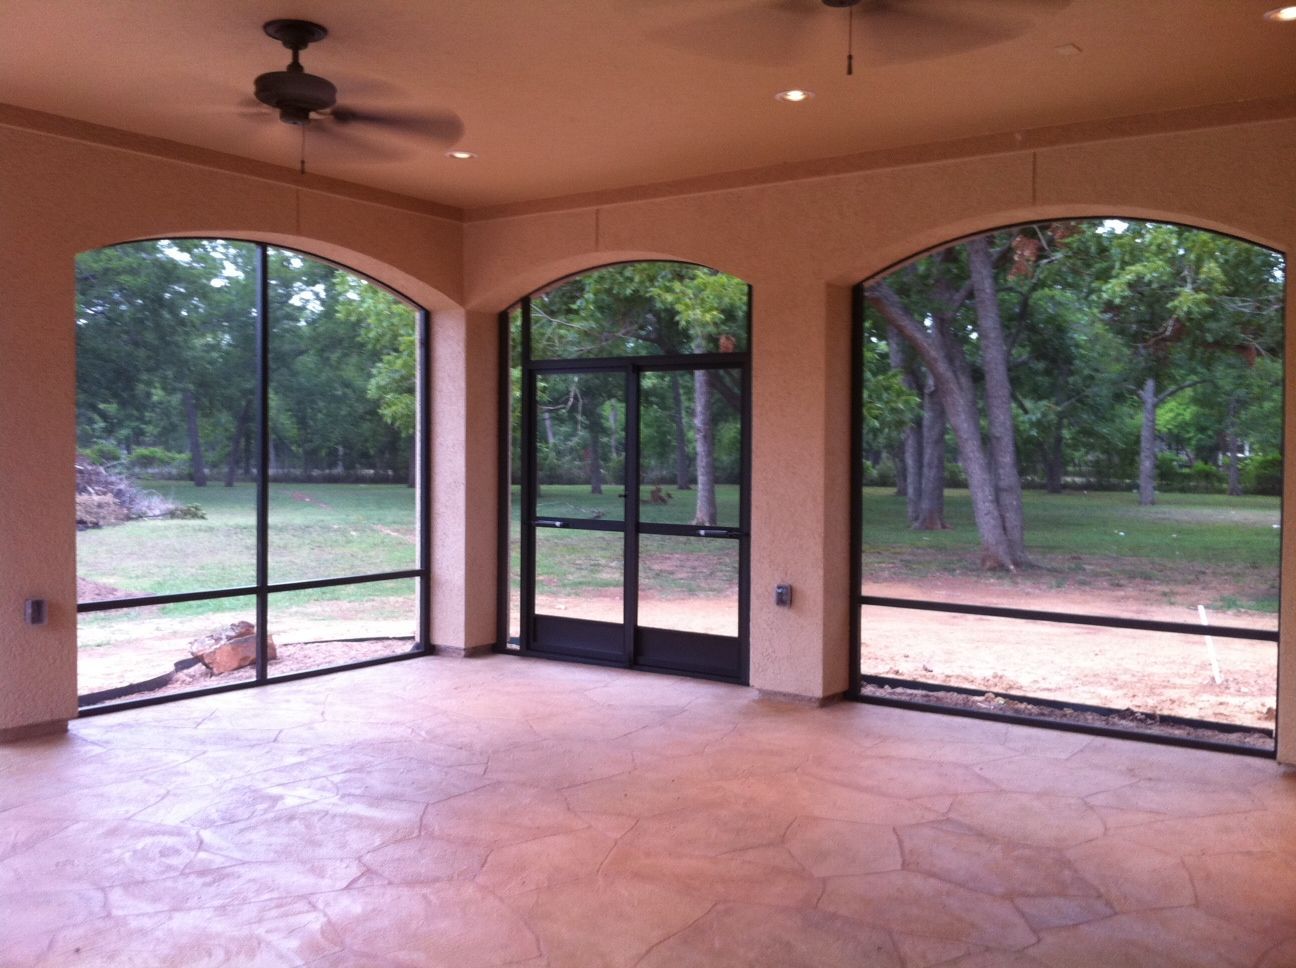 an empty screened patio room with arched windows and a ceiling fan